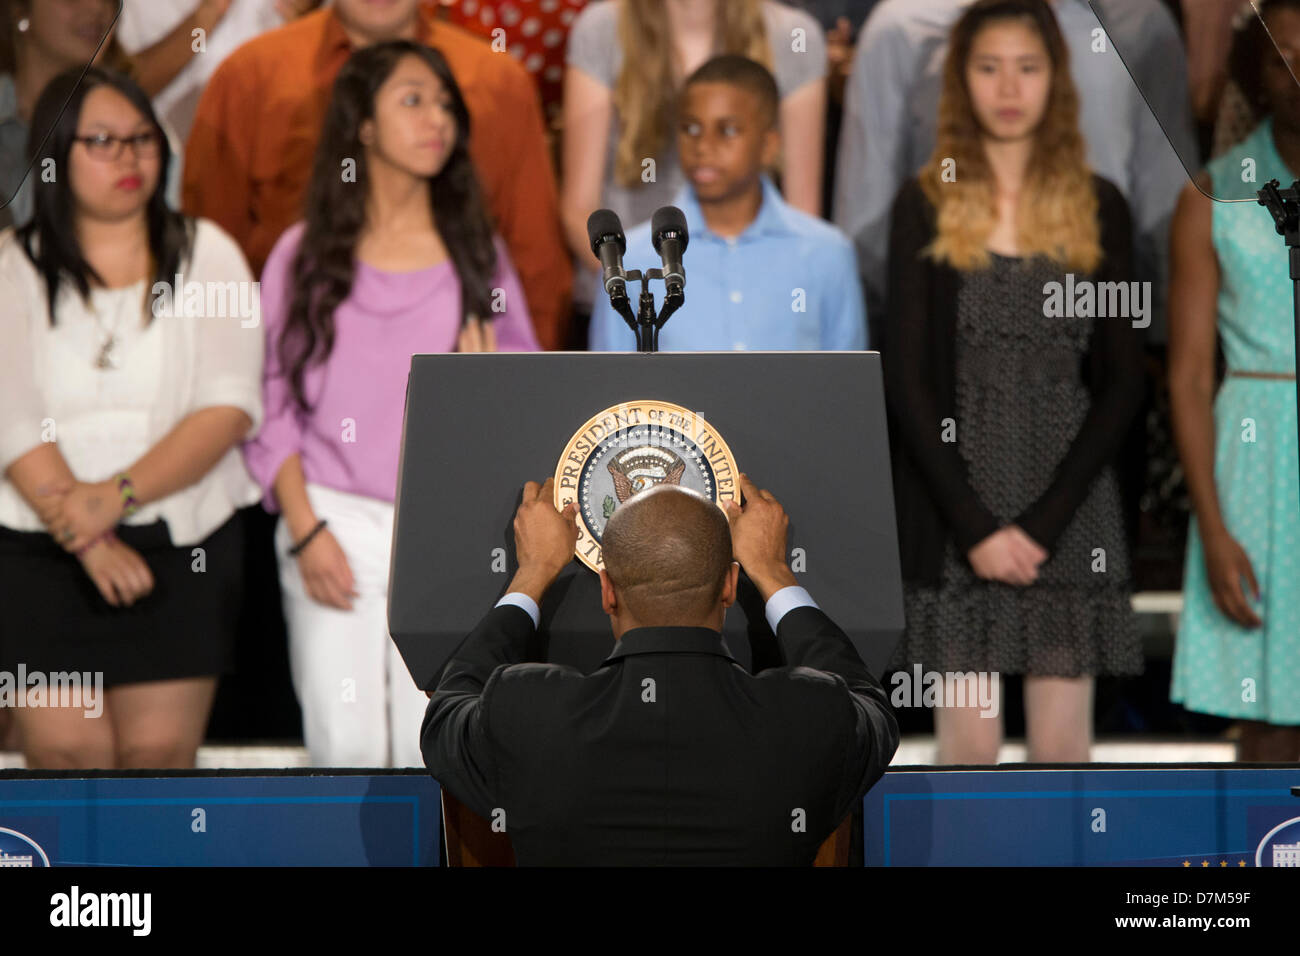 Presidential aide adjusts seal of the President of the United States of America on  lectern before Pres. Obama's speech Stock Photo